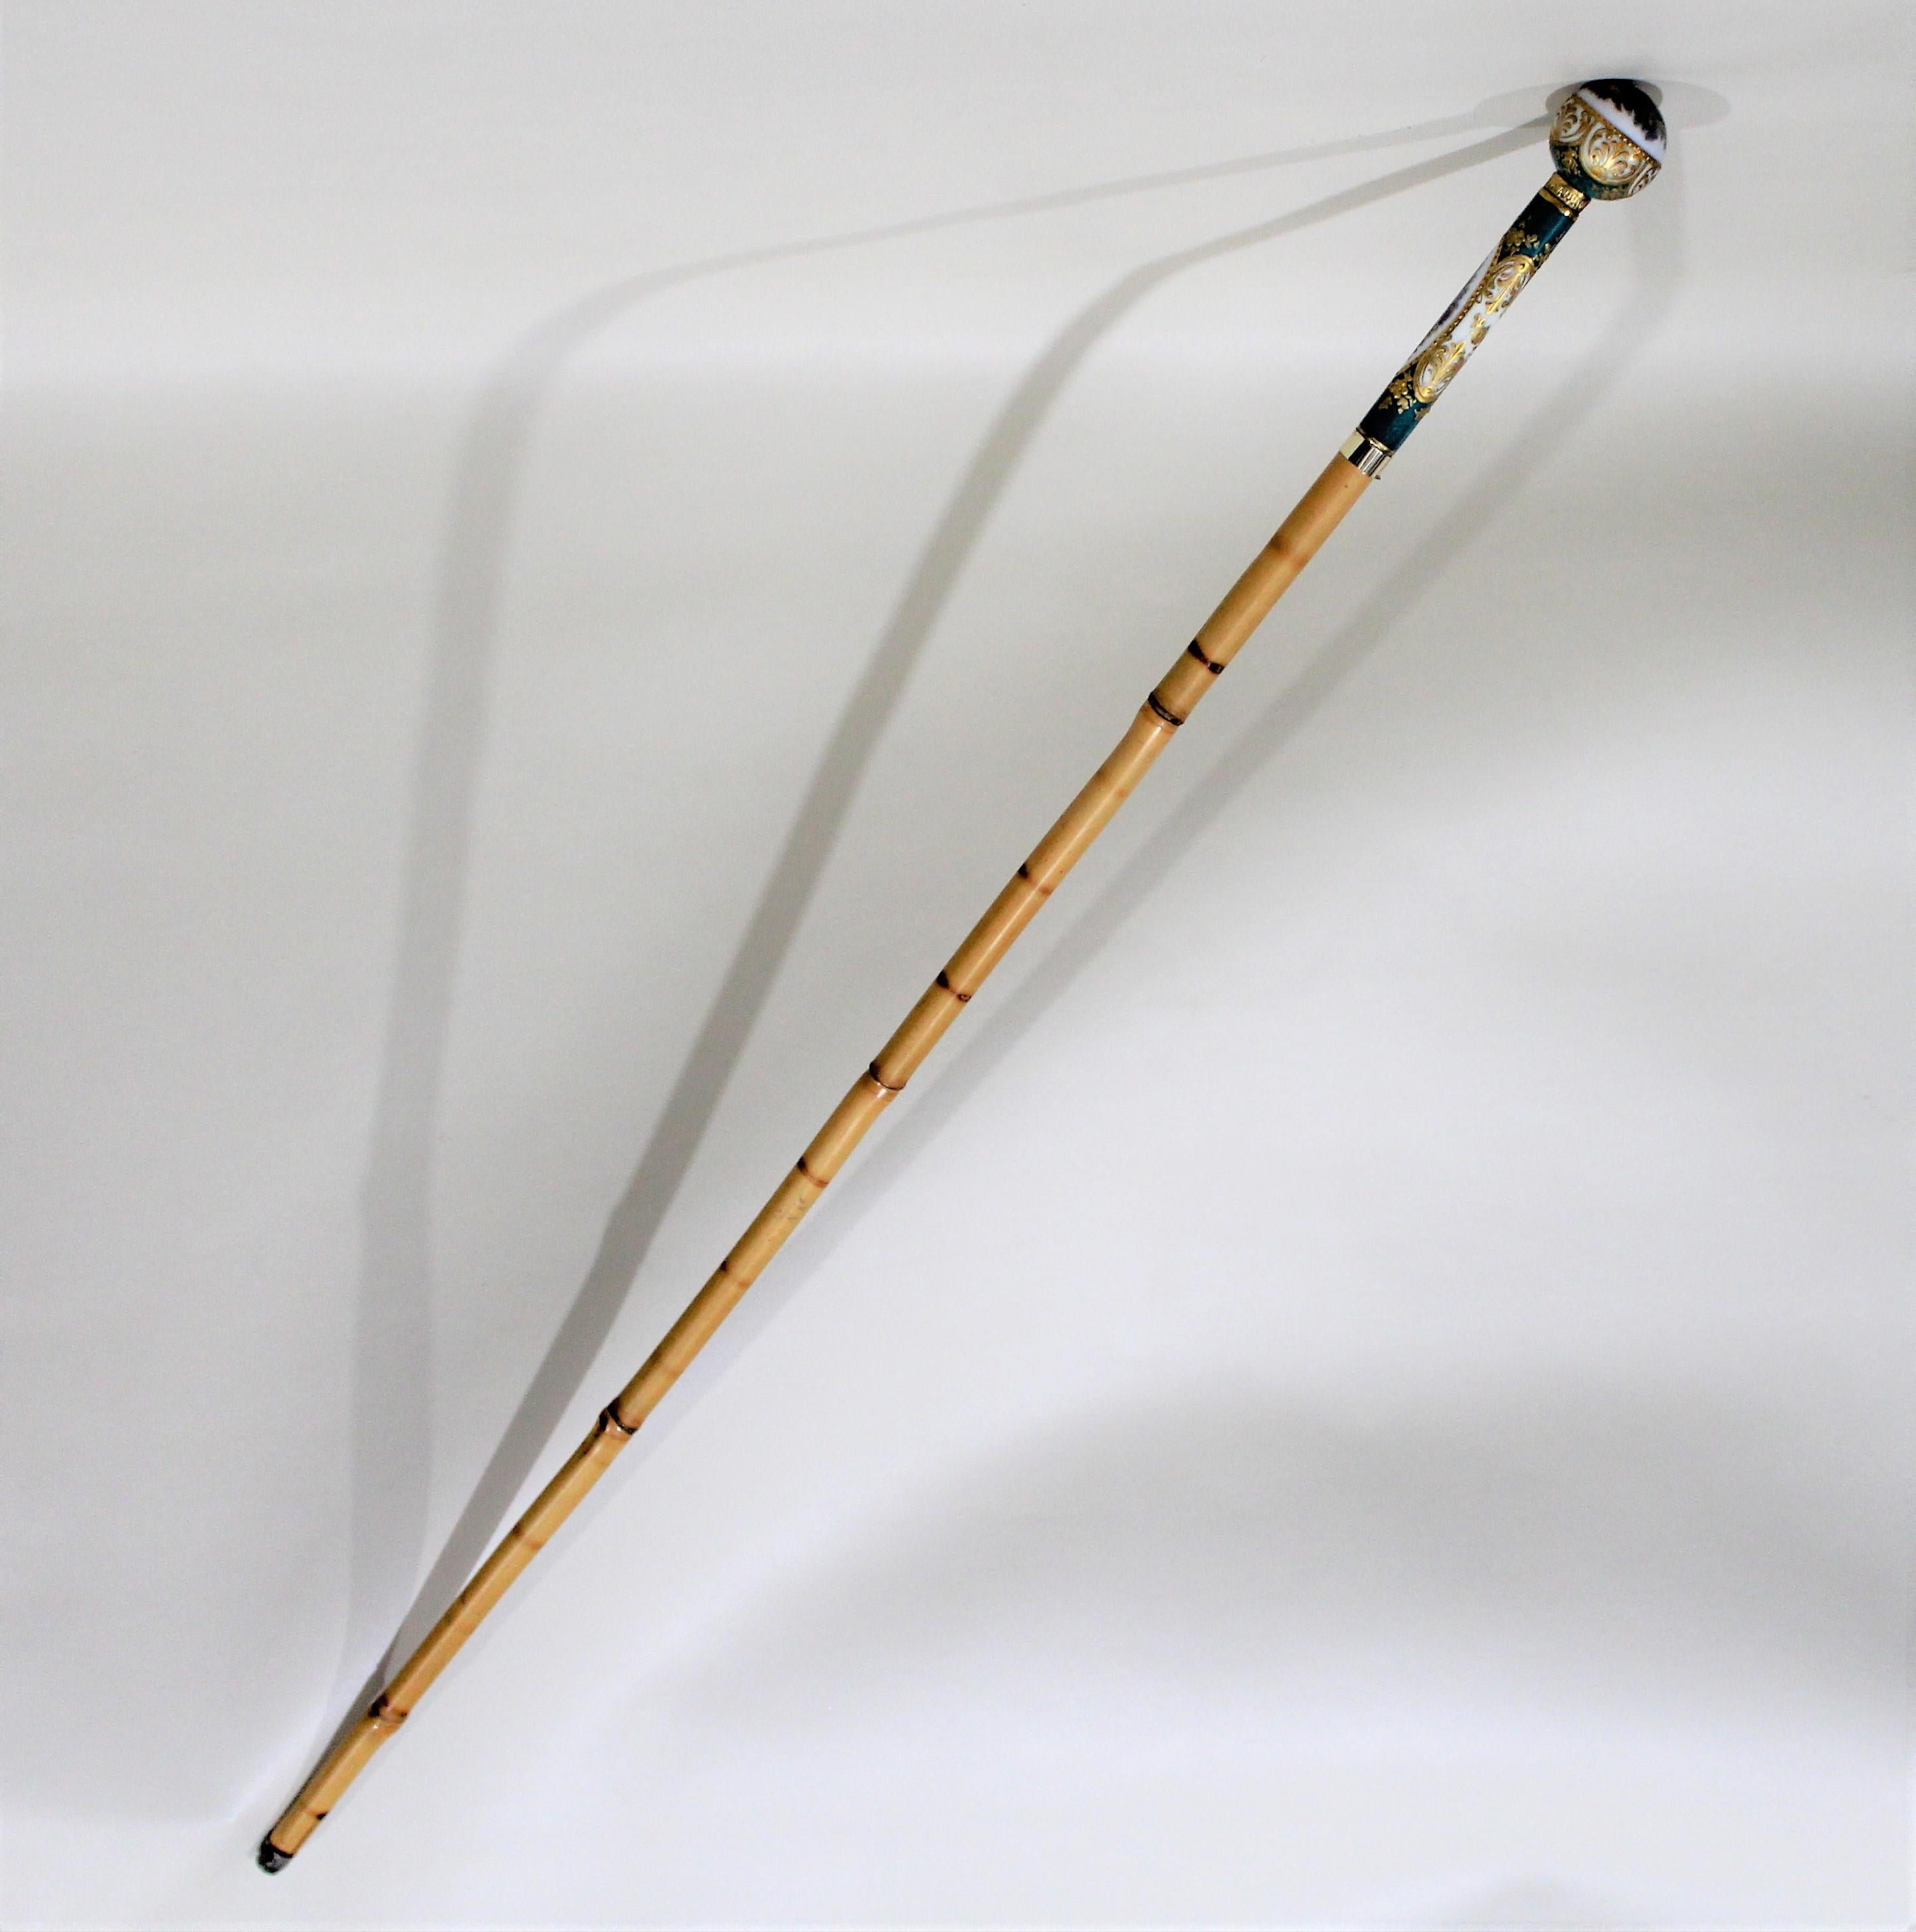 Lady's Sevres style French porcelain walking stick. Features a porcelain sphere as a grip which is connected to the shaft with a gilt collar. The wall and sphere both feature figurative scenes and they're decorated with gold gilt floral and foliate